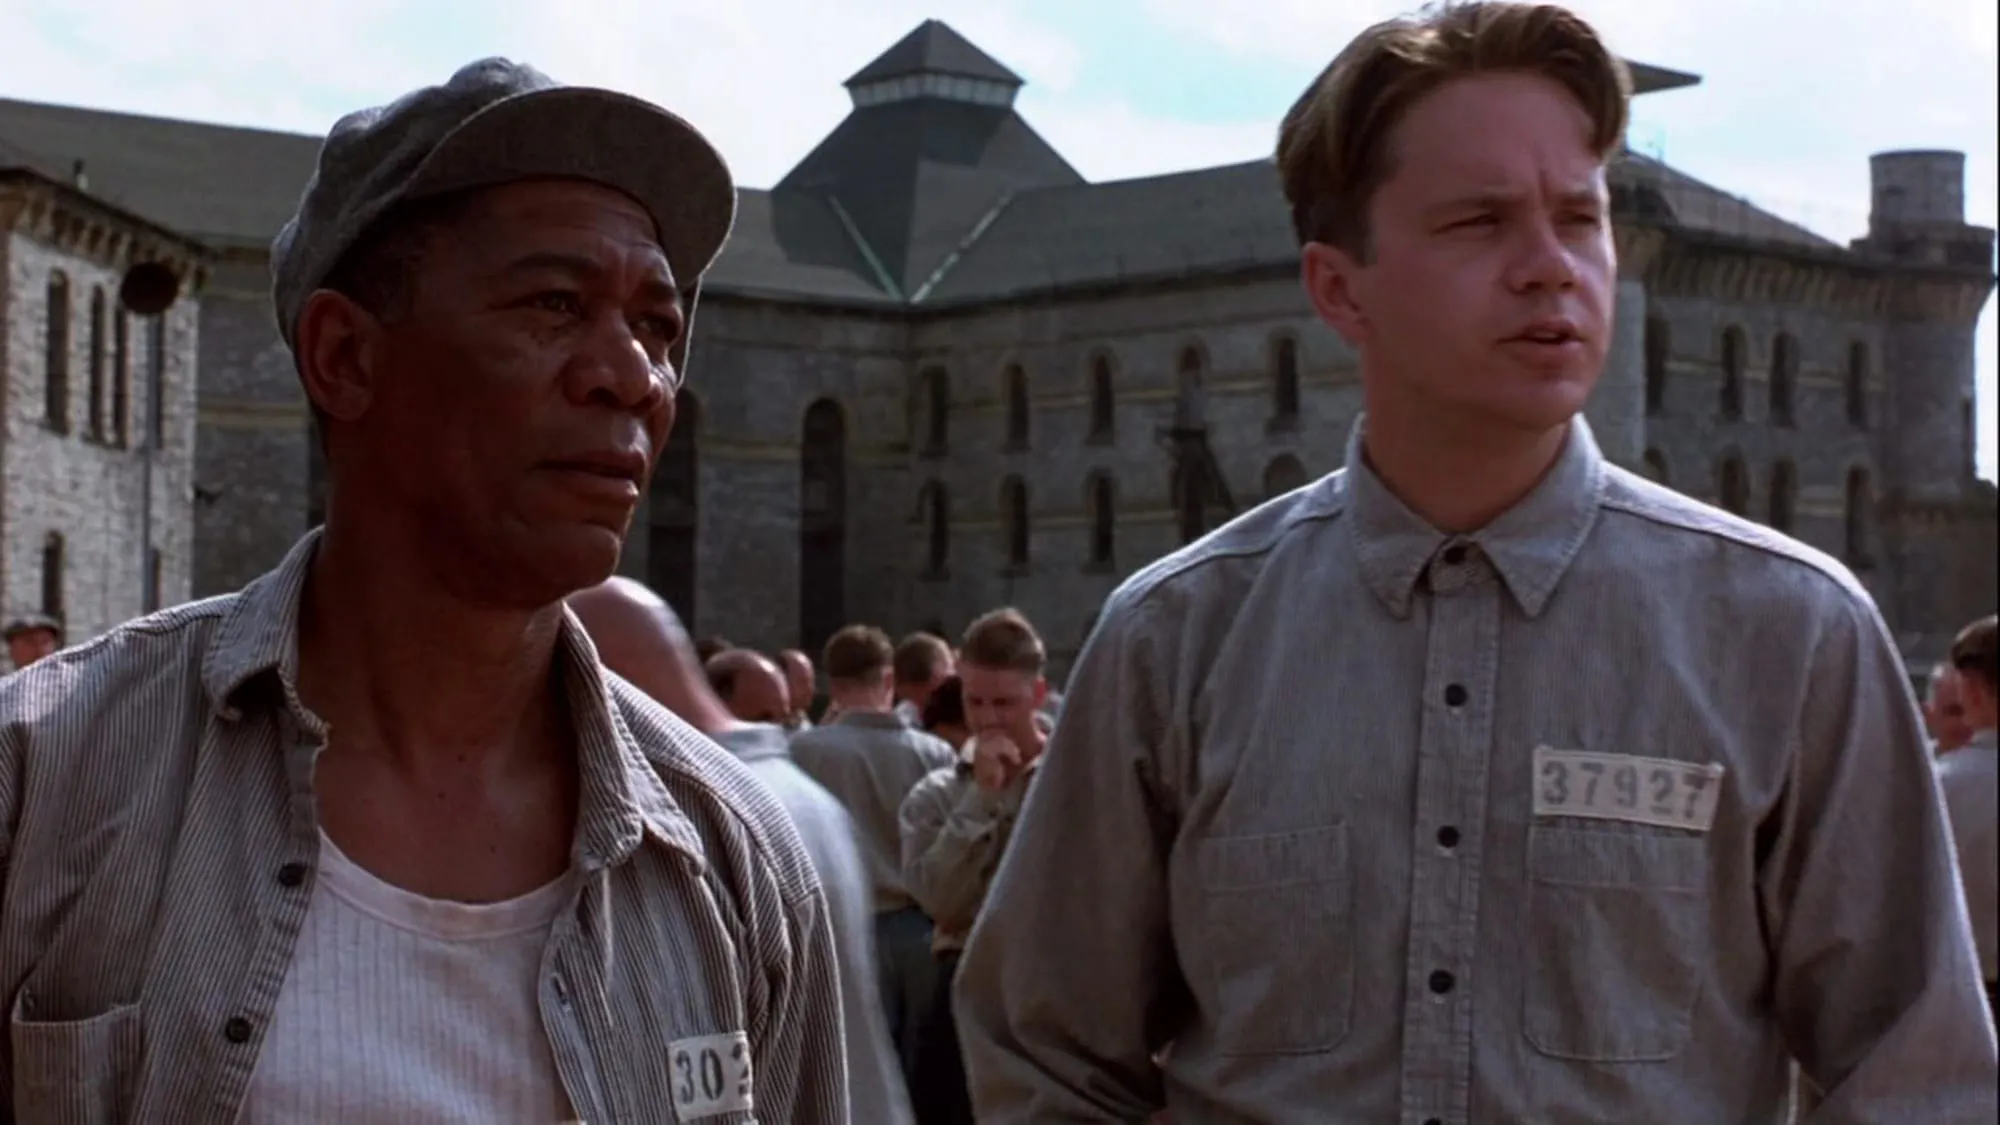 The Shawshank Redemption: Andy with his prison number